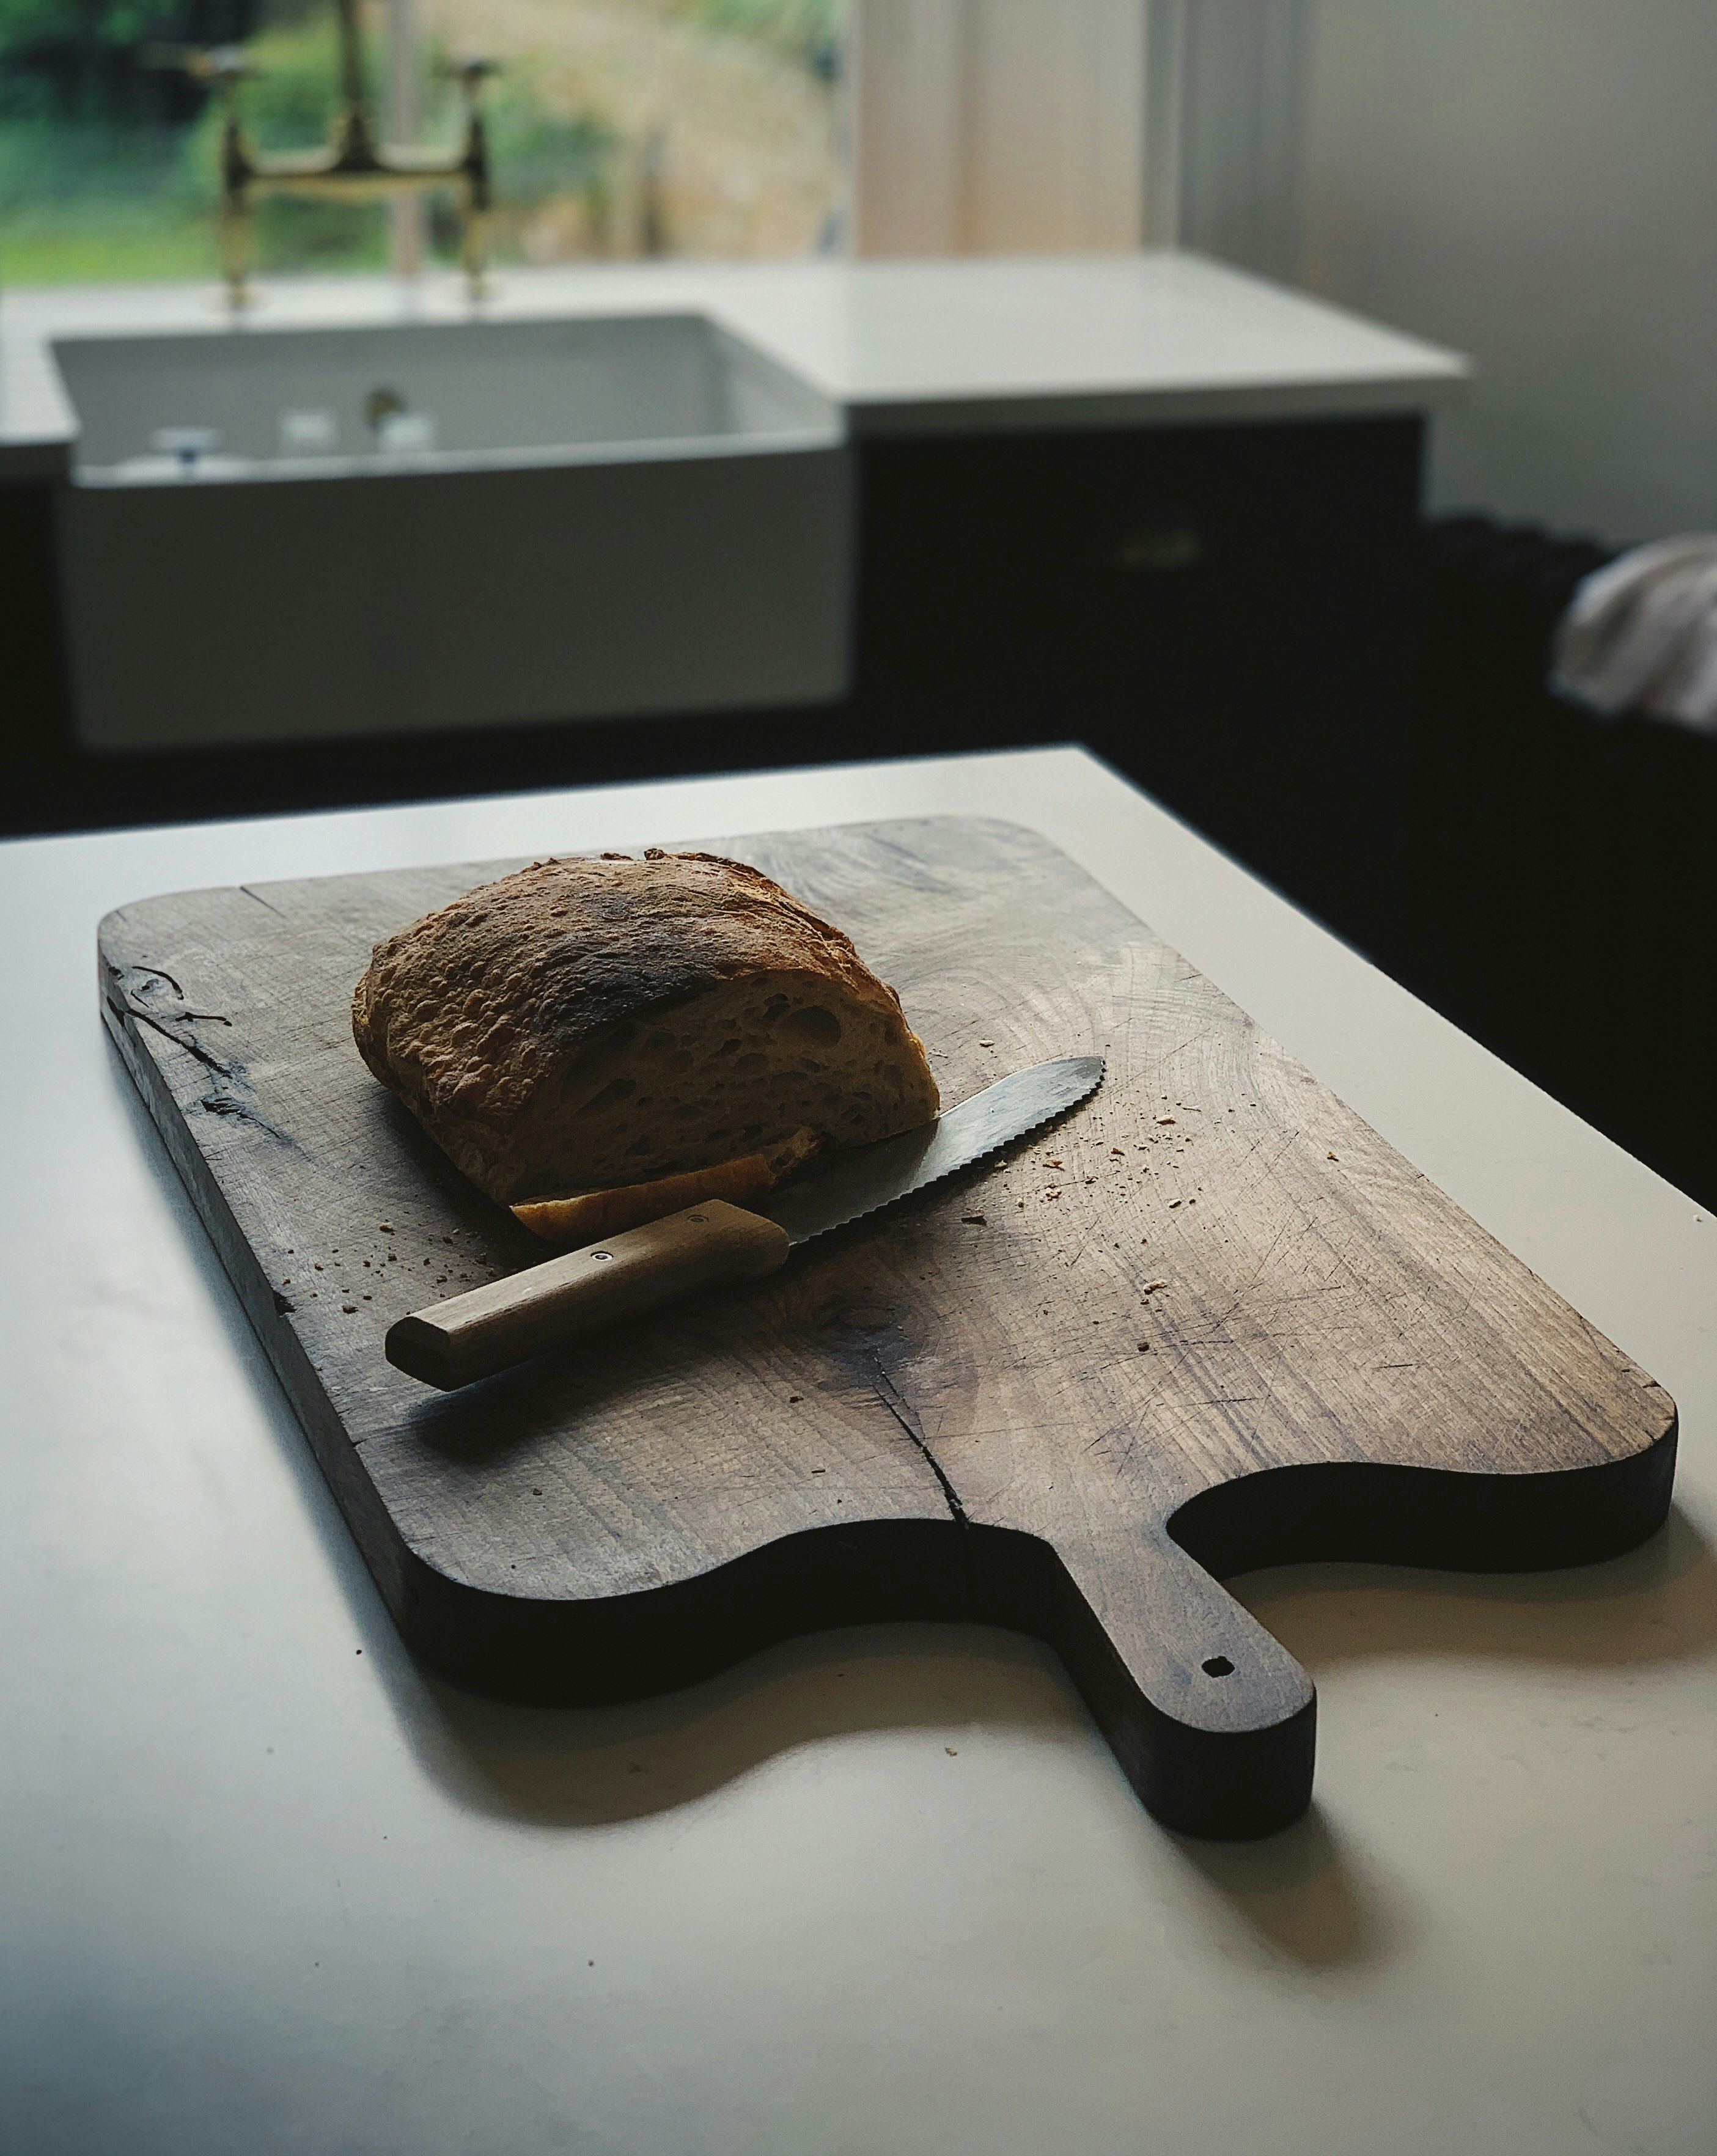 baked bread on chopping board with knife